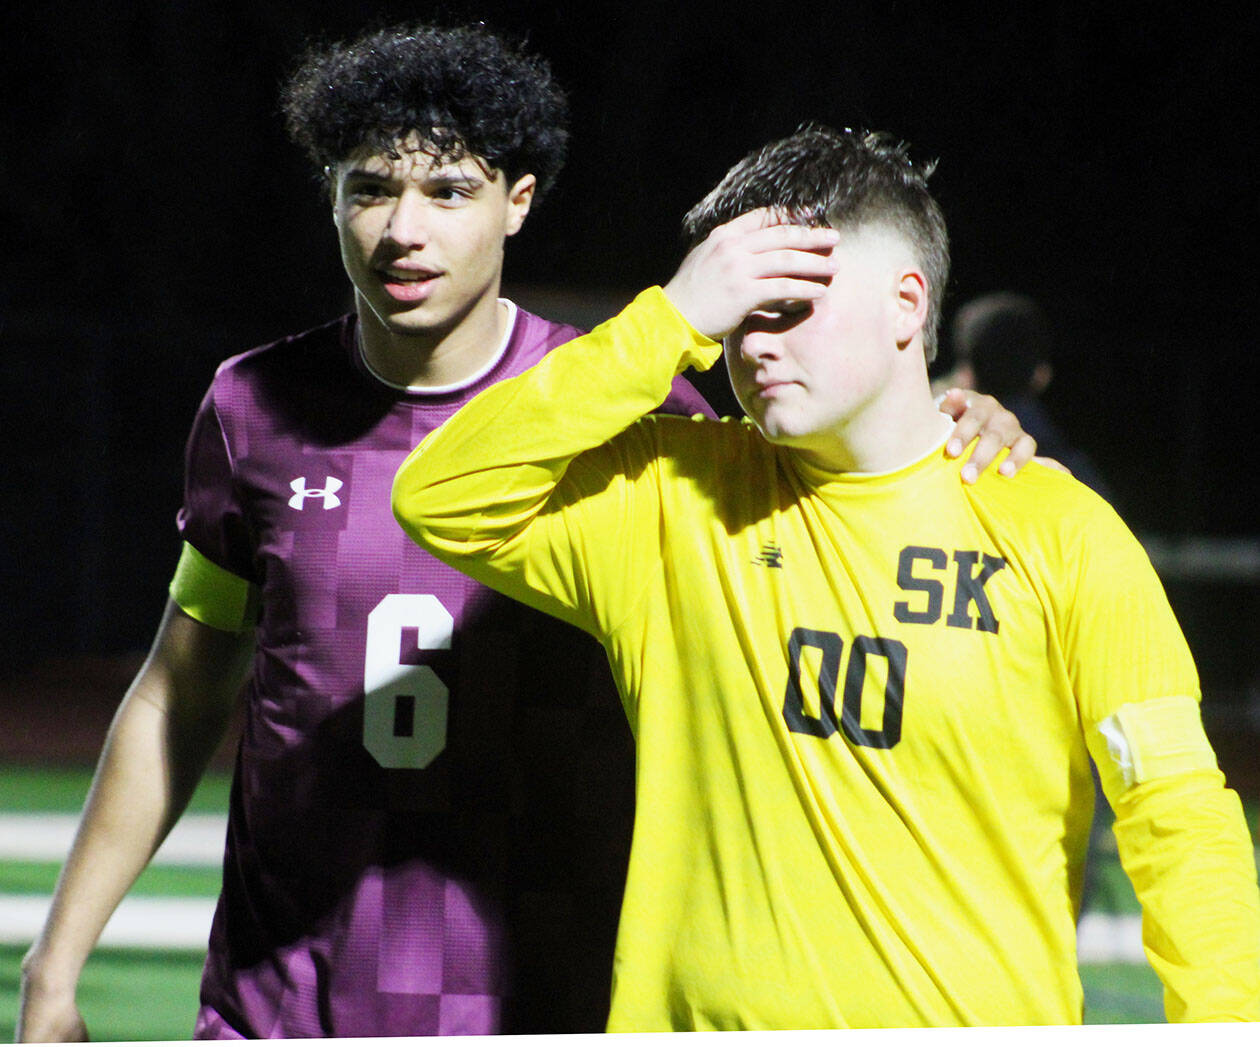 Elisha Meyer/Kitsap News Group photos
Senior Brandon Durr, left, walks off the field with his hand around the shoulder of senior goalie Landon Kirby seconds after Olympia’s victory over the South Kitsap Wolves.